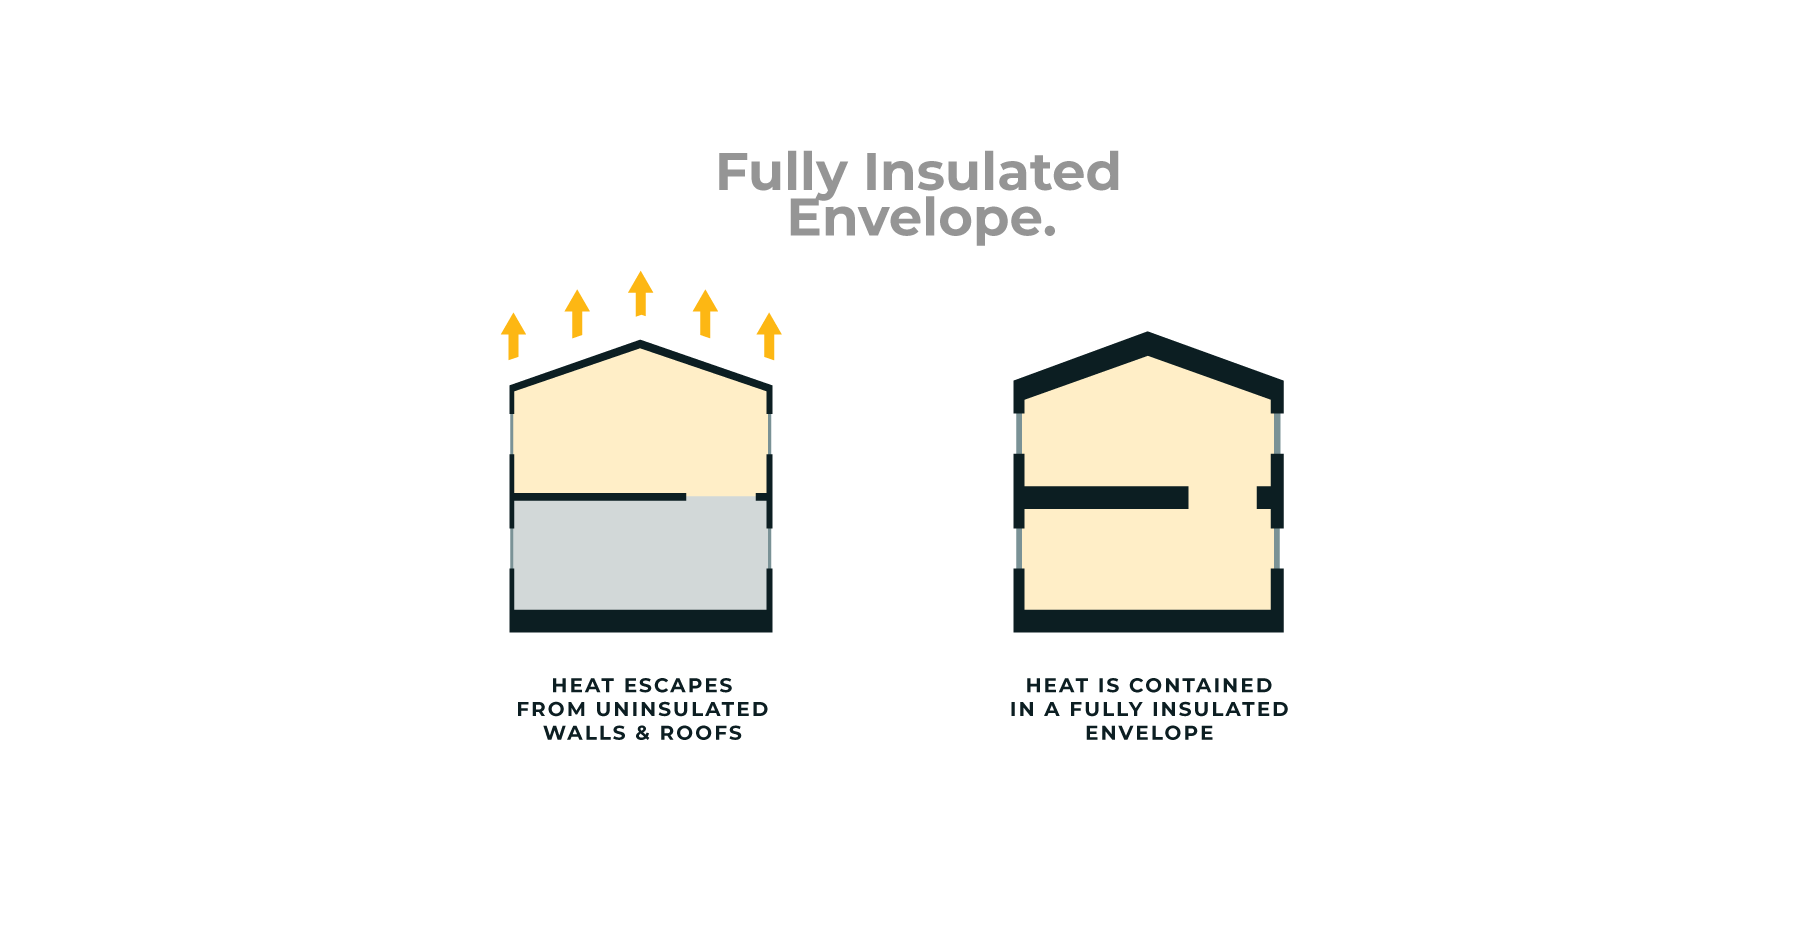 Sustainable home design's value of a fully insulated building envelope